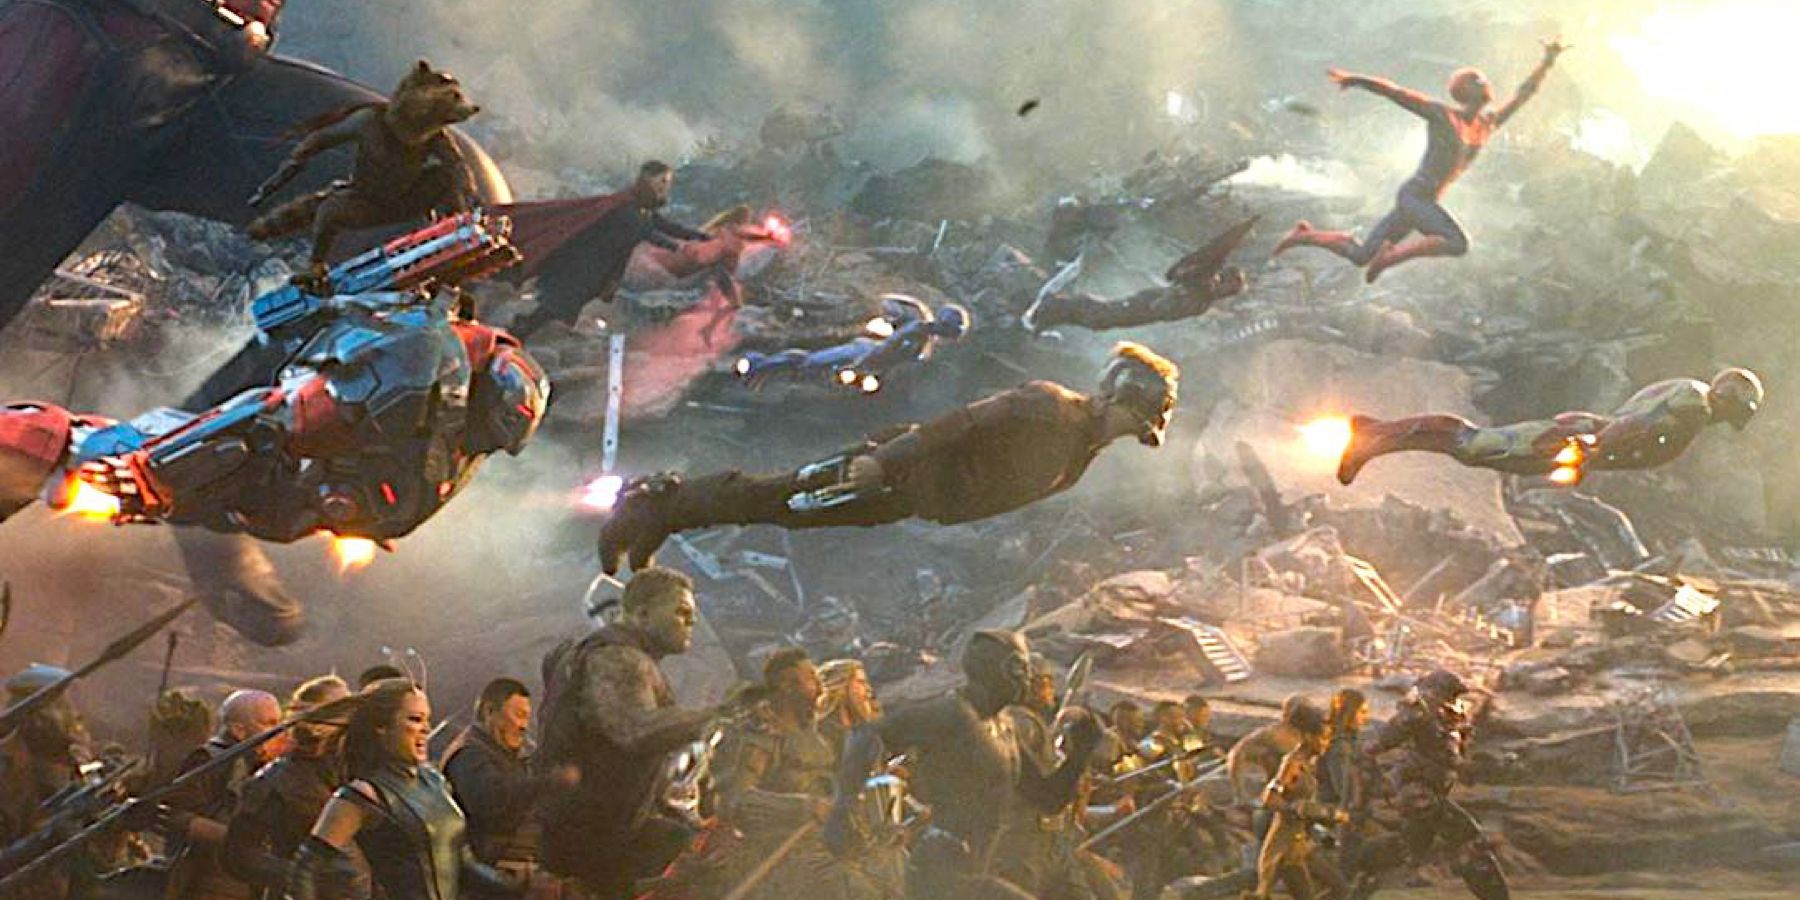 A horde of Superheroes, the Avengers and their resurrected friends, charge en masse amidst the wreckage of their decimated compound in Avengers: Endgame.